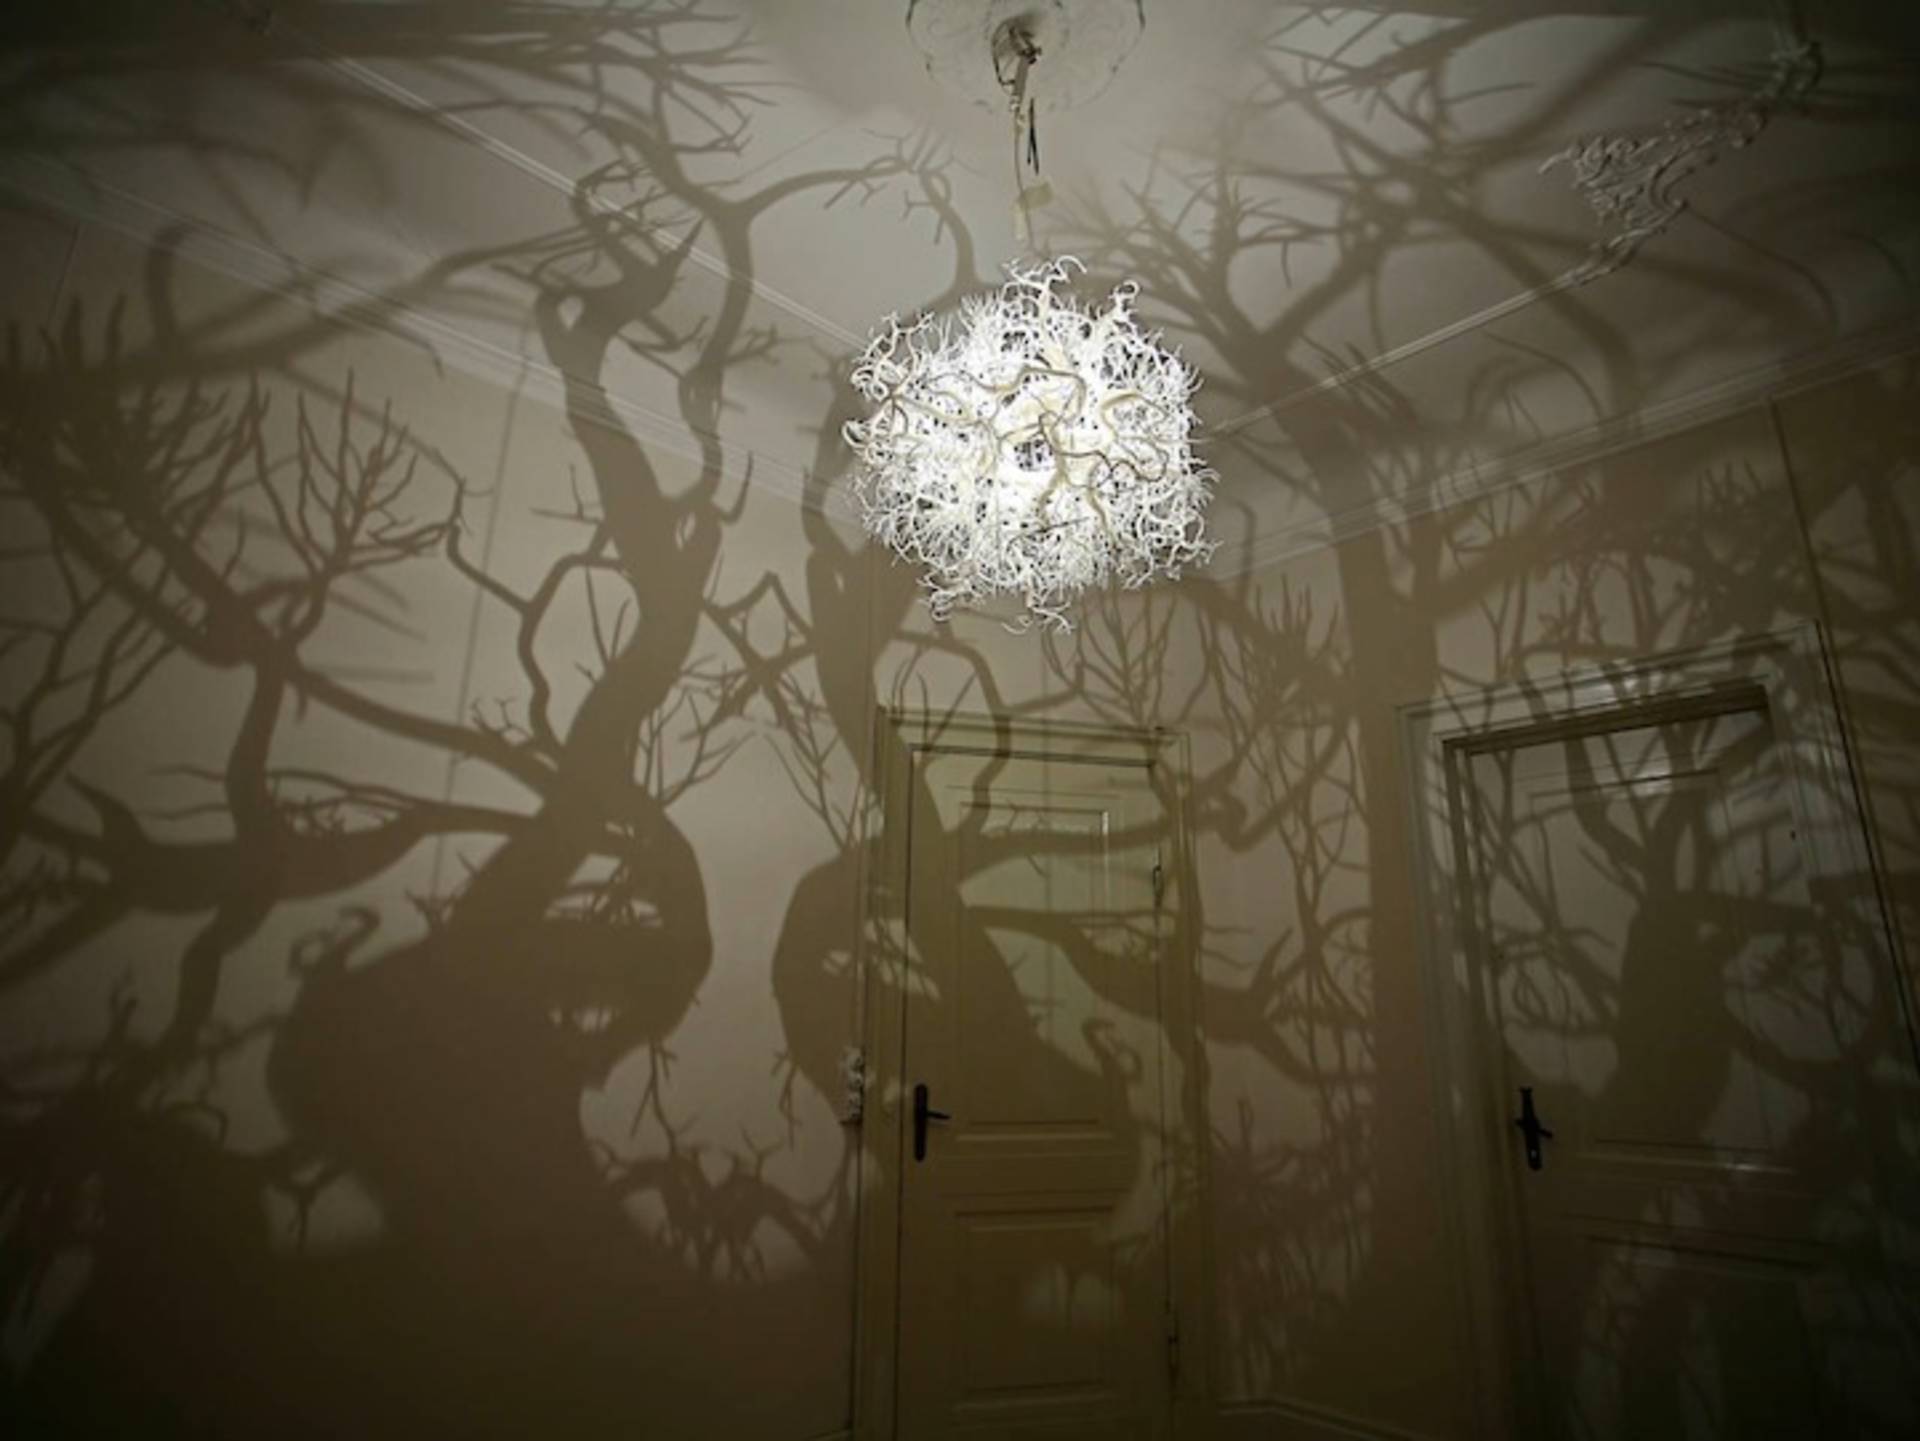 Forms in Nature” Lamp, Casting Unusual Shadows, by Thyra Hilden and ...